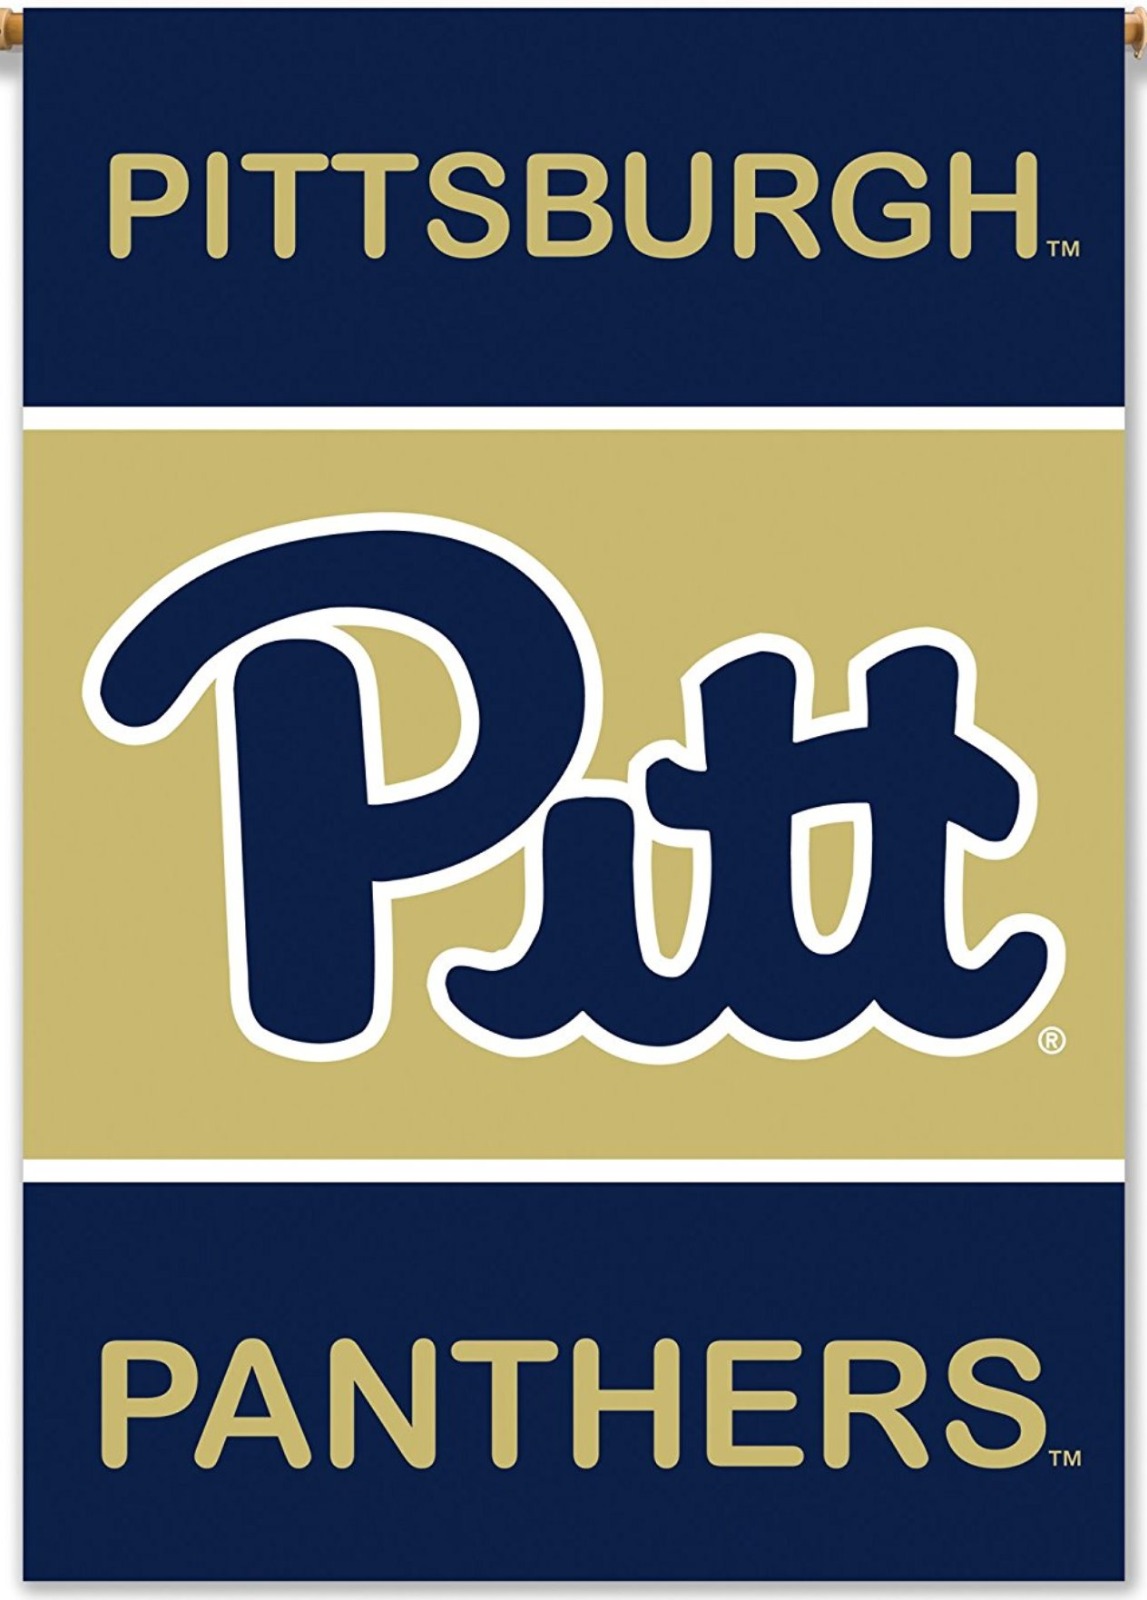 Pittsburgh Panthers PITT Premium 2-sided 28x40 Banner Outdoor Flag ...